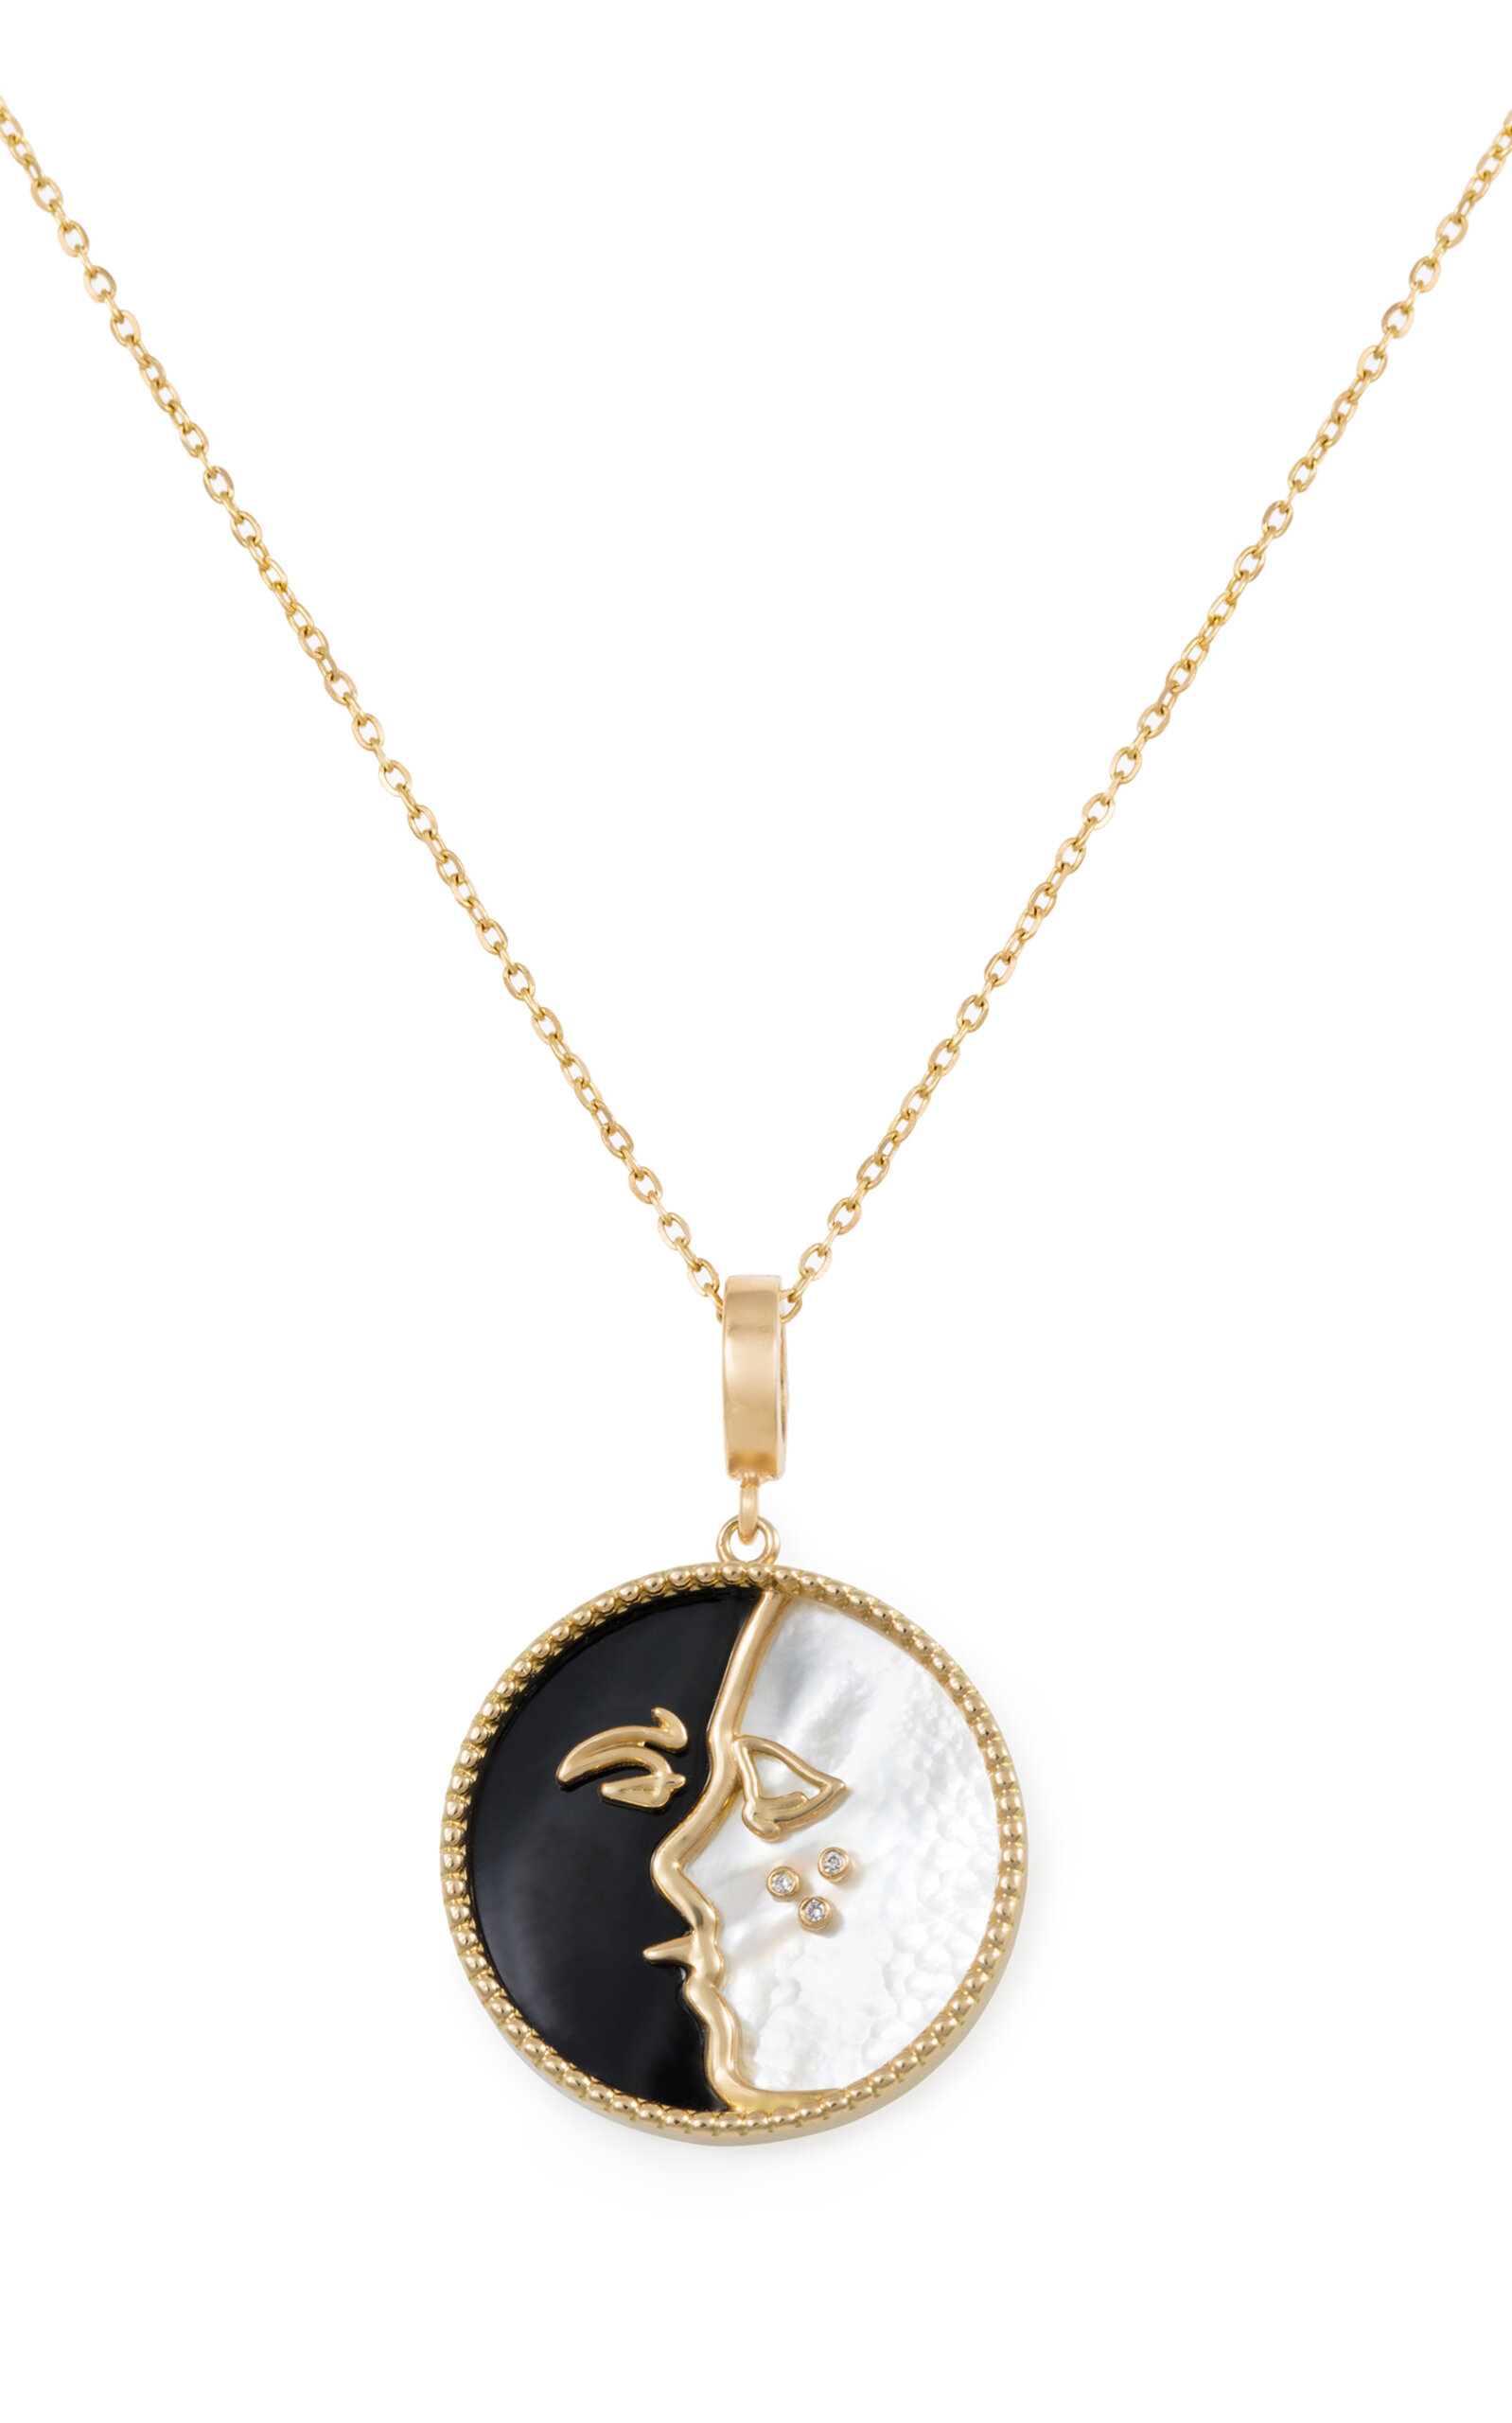 L'atelier Nawbar The Kiss 18k Yellow Gold Diamond; Mother-of-pearl; Onyx Necklace In Multi